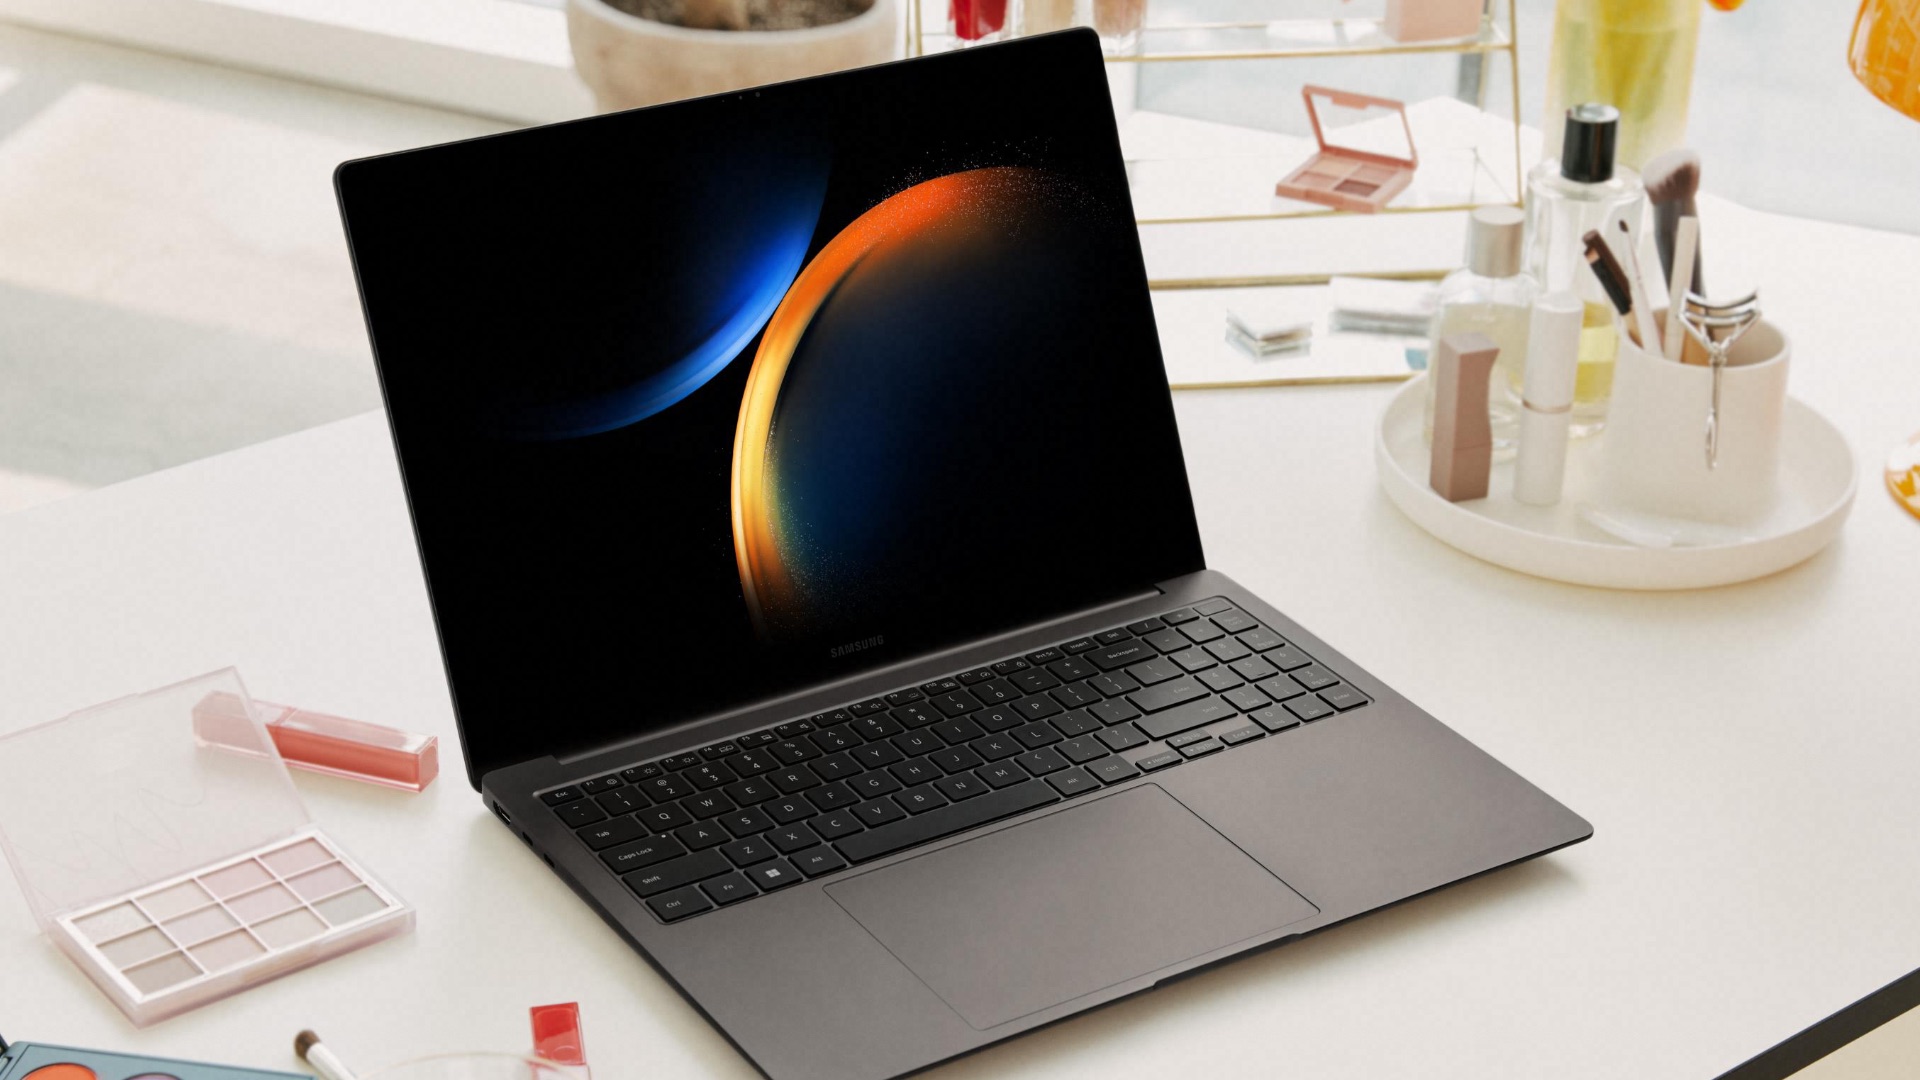 Samsung Galaxy Book: Specs, price, release date and more